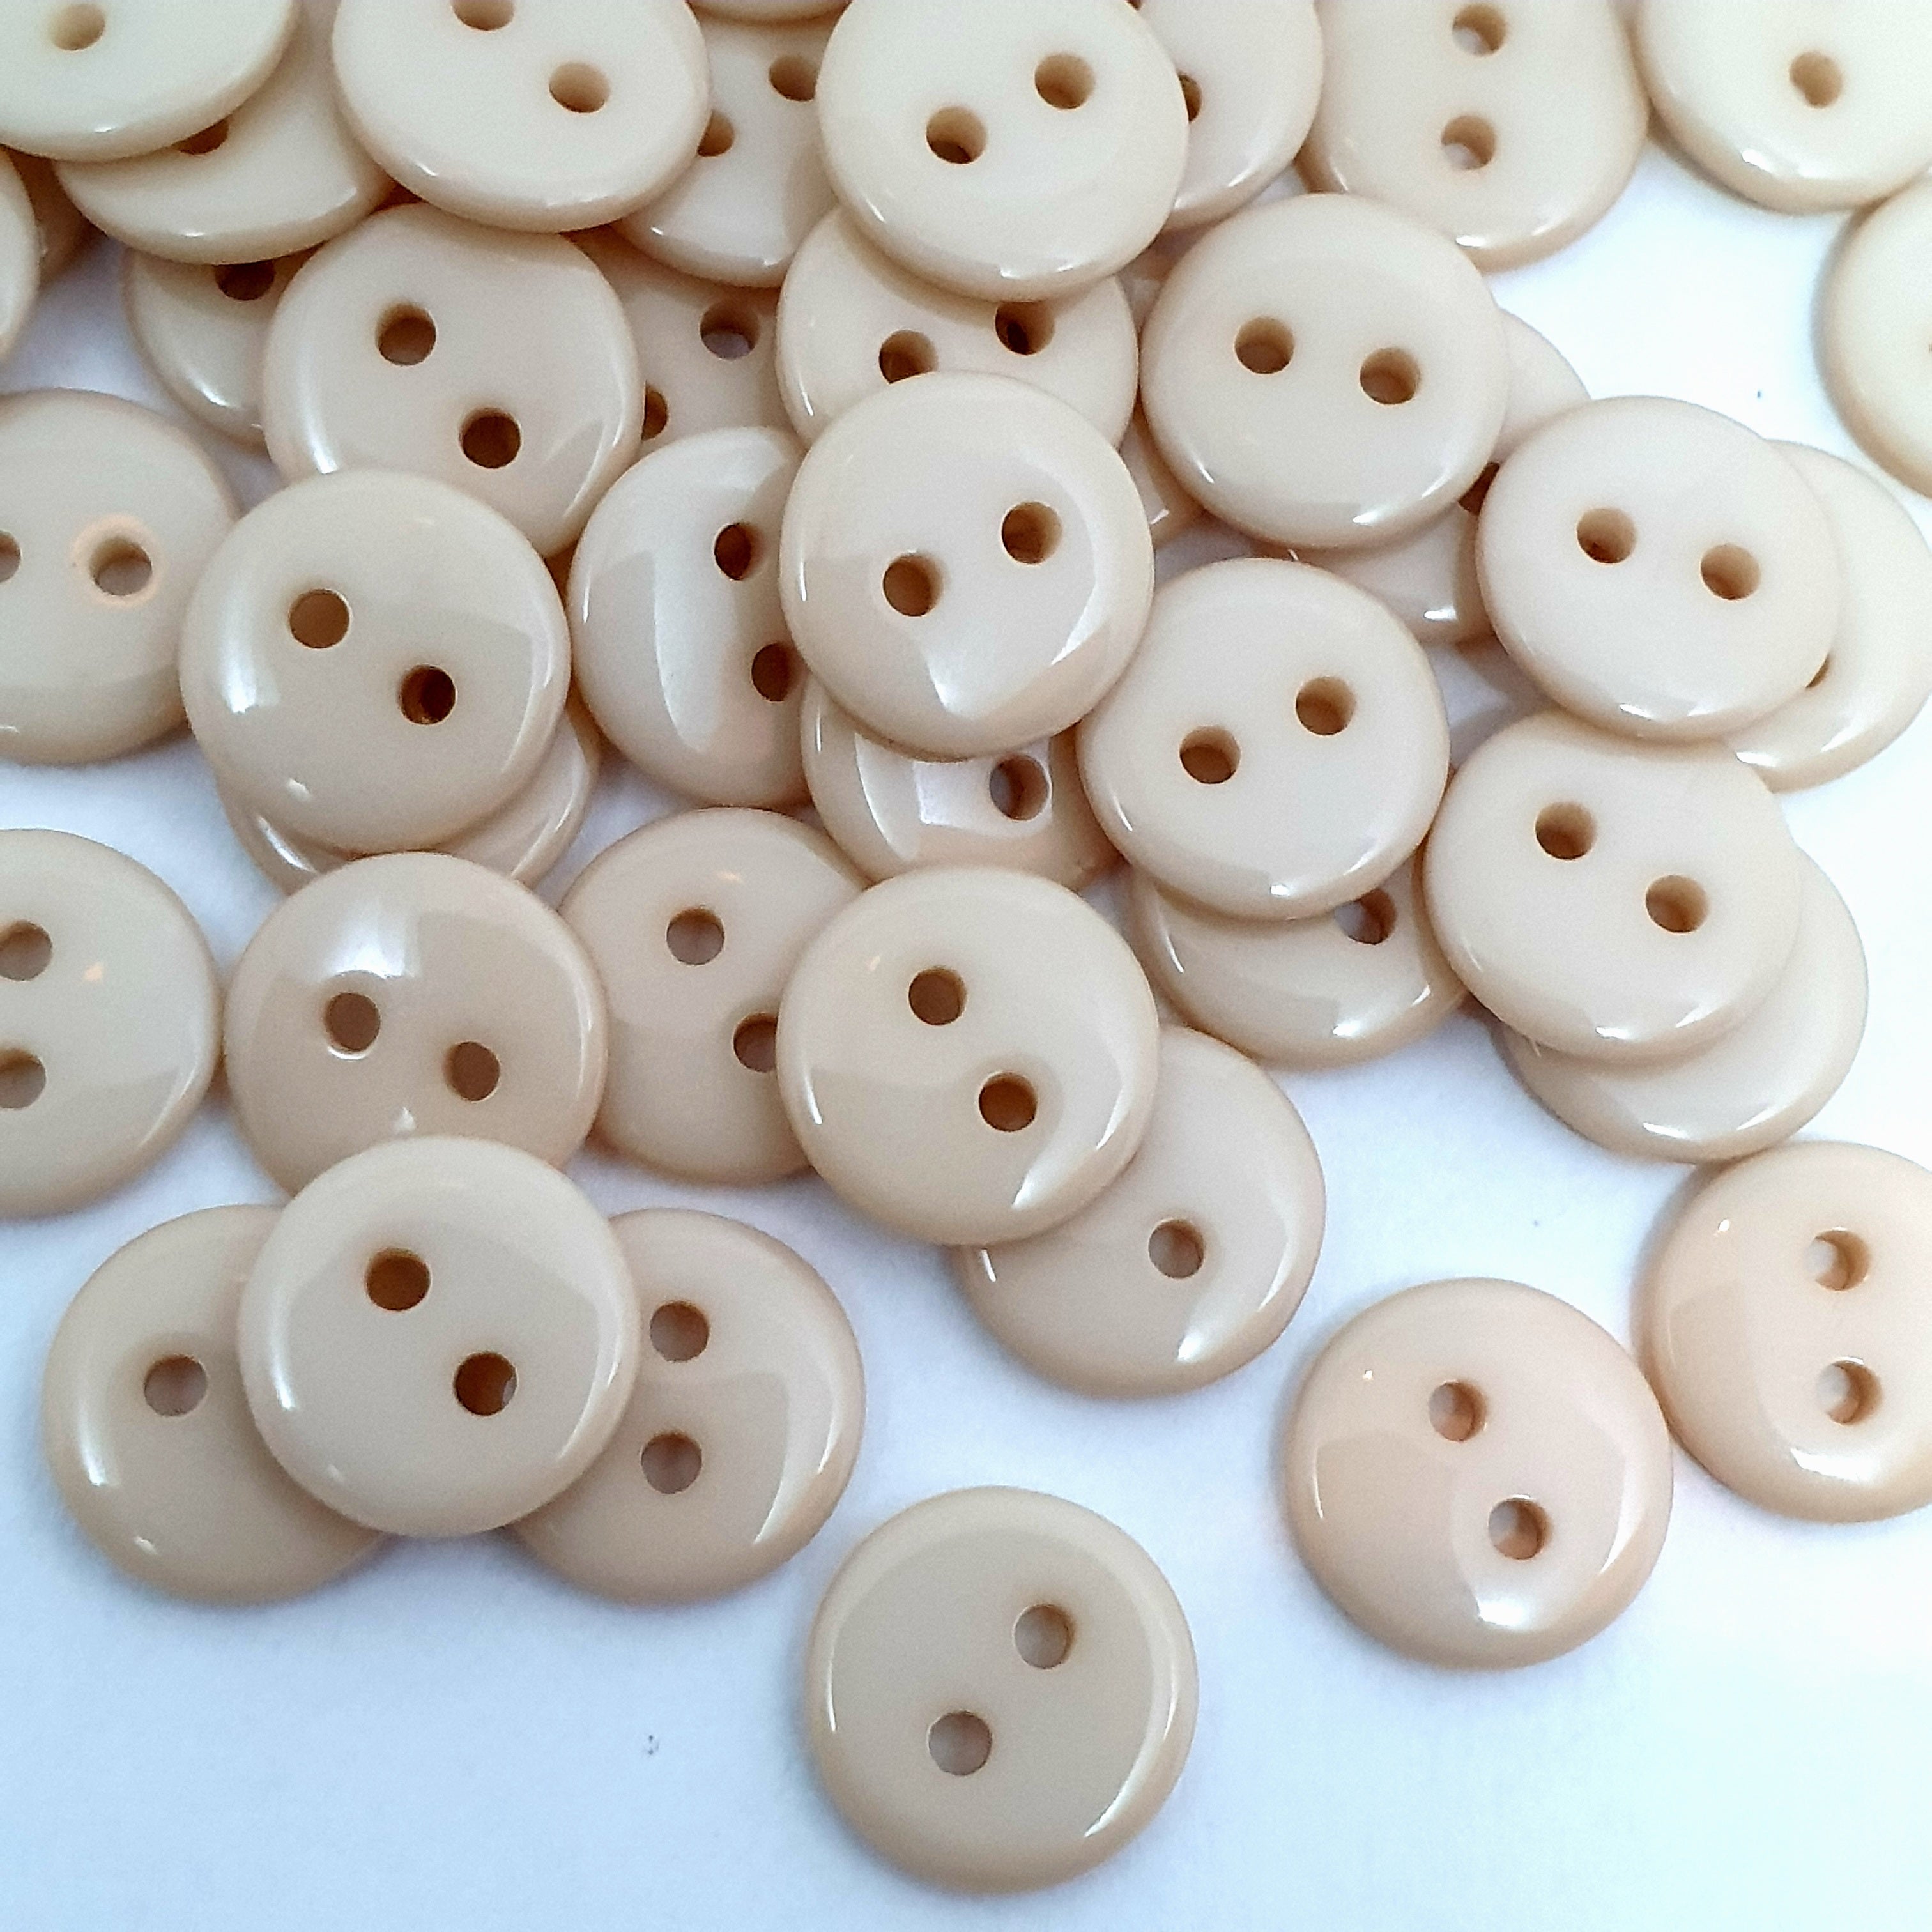 MajorCrafts 120pcs 10mm Sepia Brown 2 Holes Small Round Resin Sewing Buttons B18